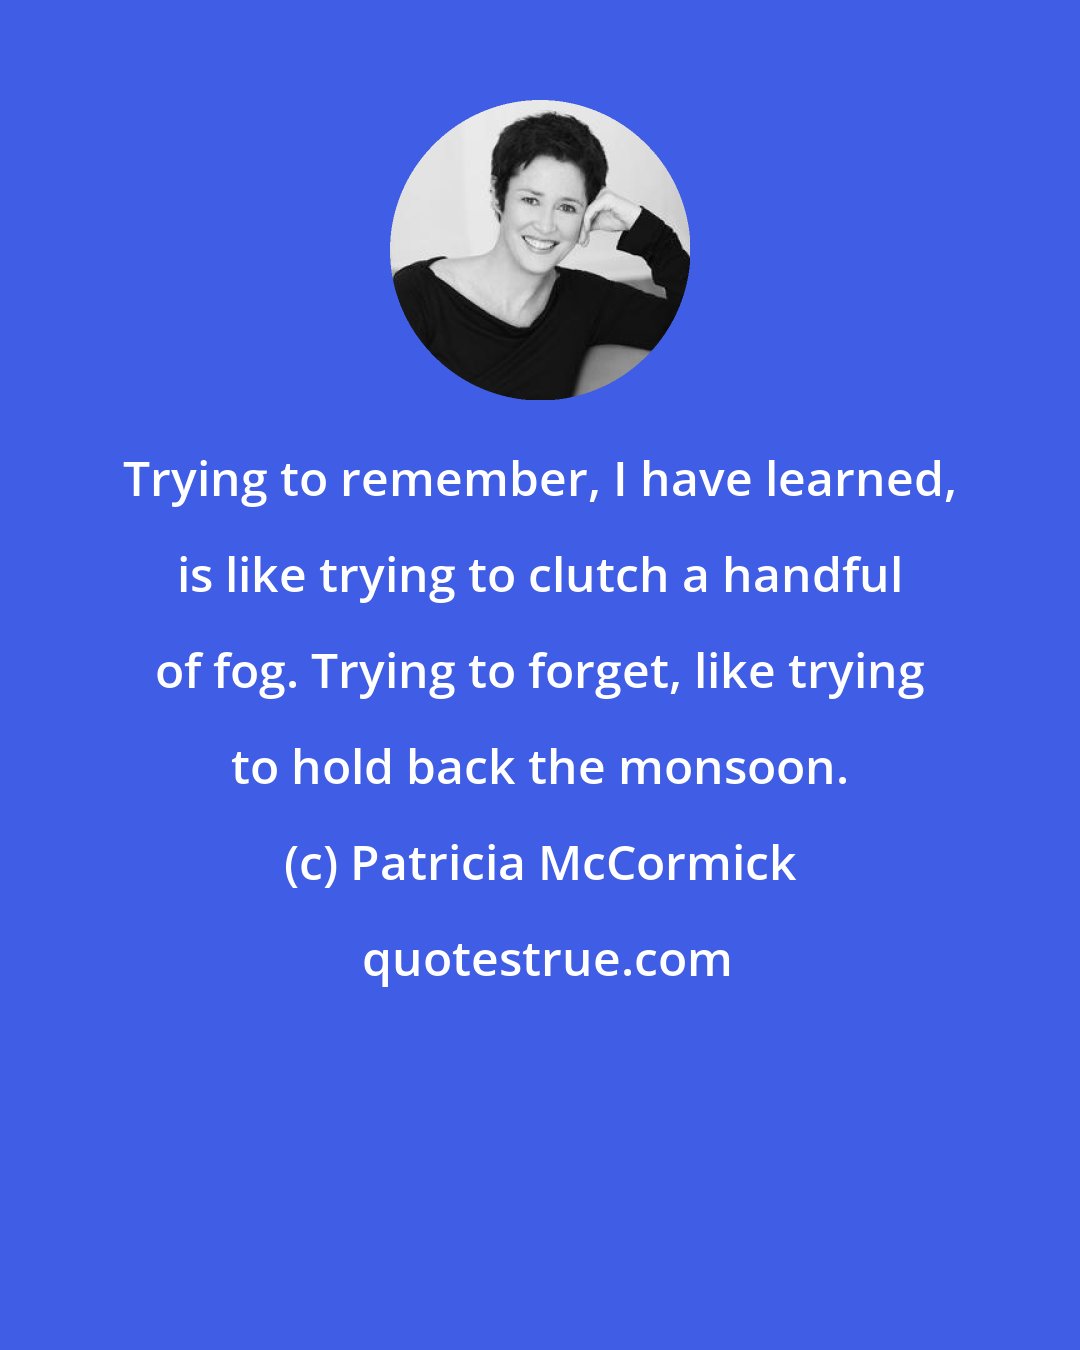 Patricia McCormick: Trying to remember, I have learned, is like trying to clutch a handful of fog. Trying to forget, like trying to hold back the monsoon.